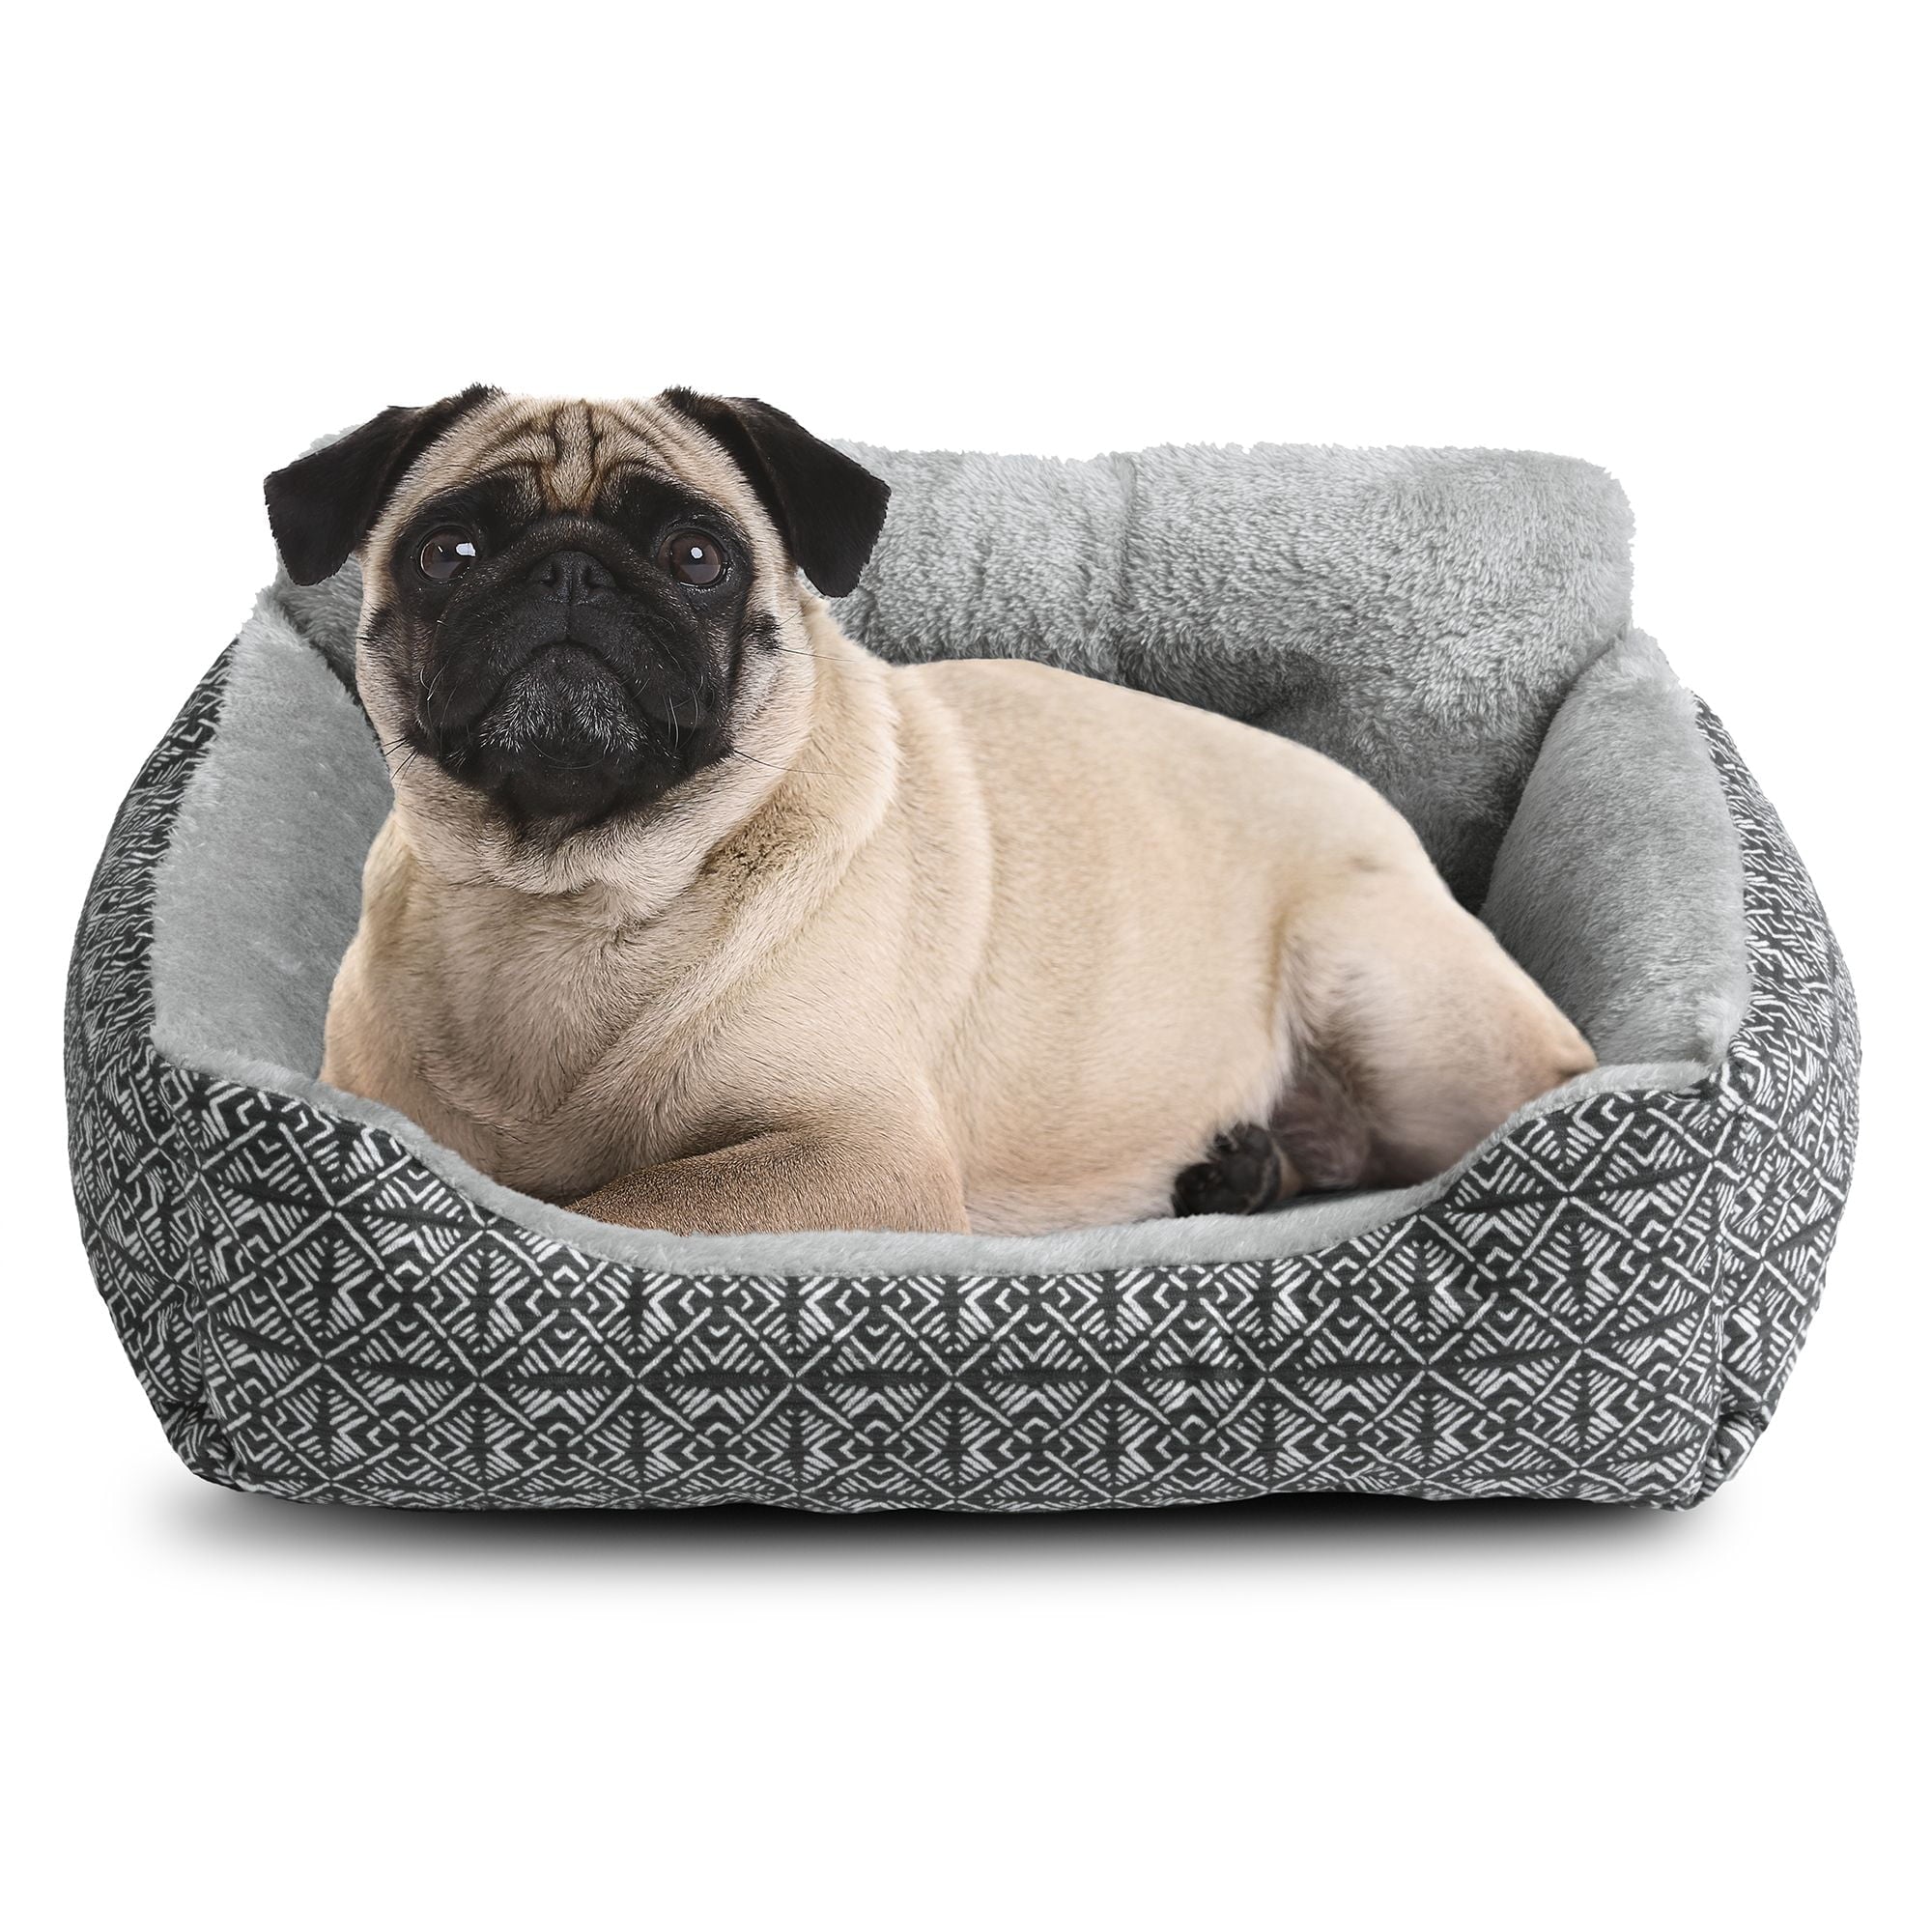 Wholesale prices with free shipping all over United States Vibrant Life Lounger Pet Bed, Small, 21” x 17” - Steven Deals